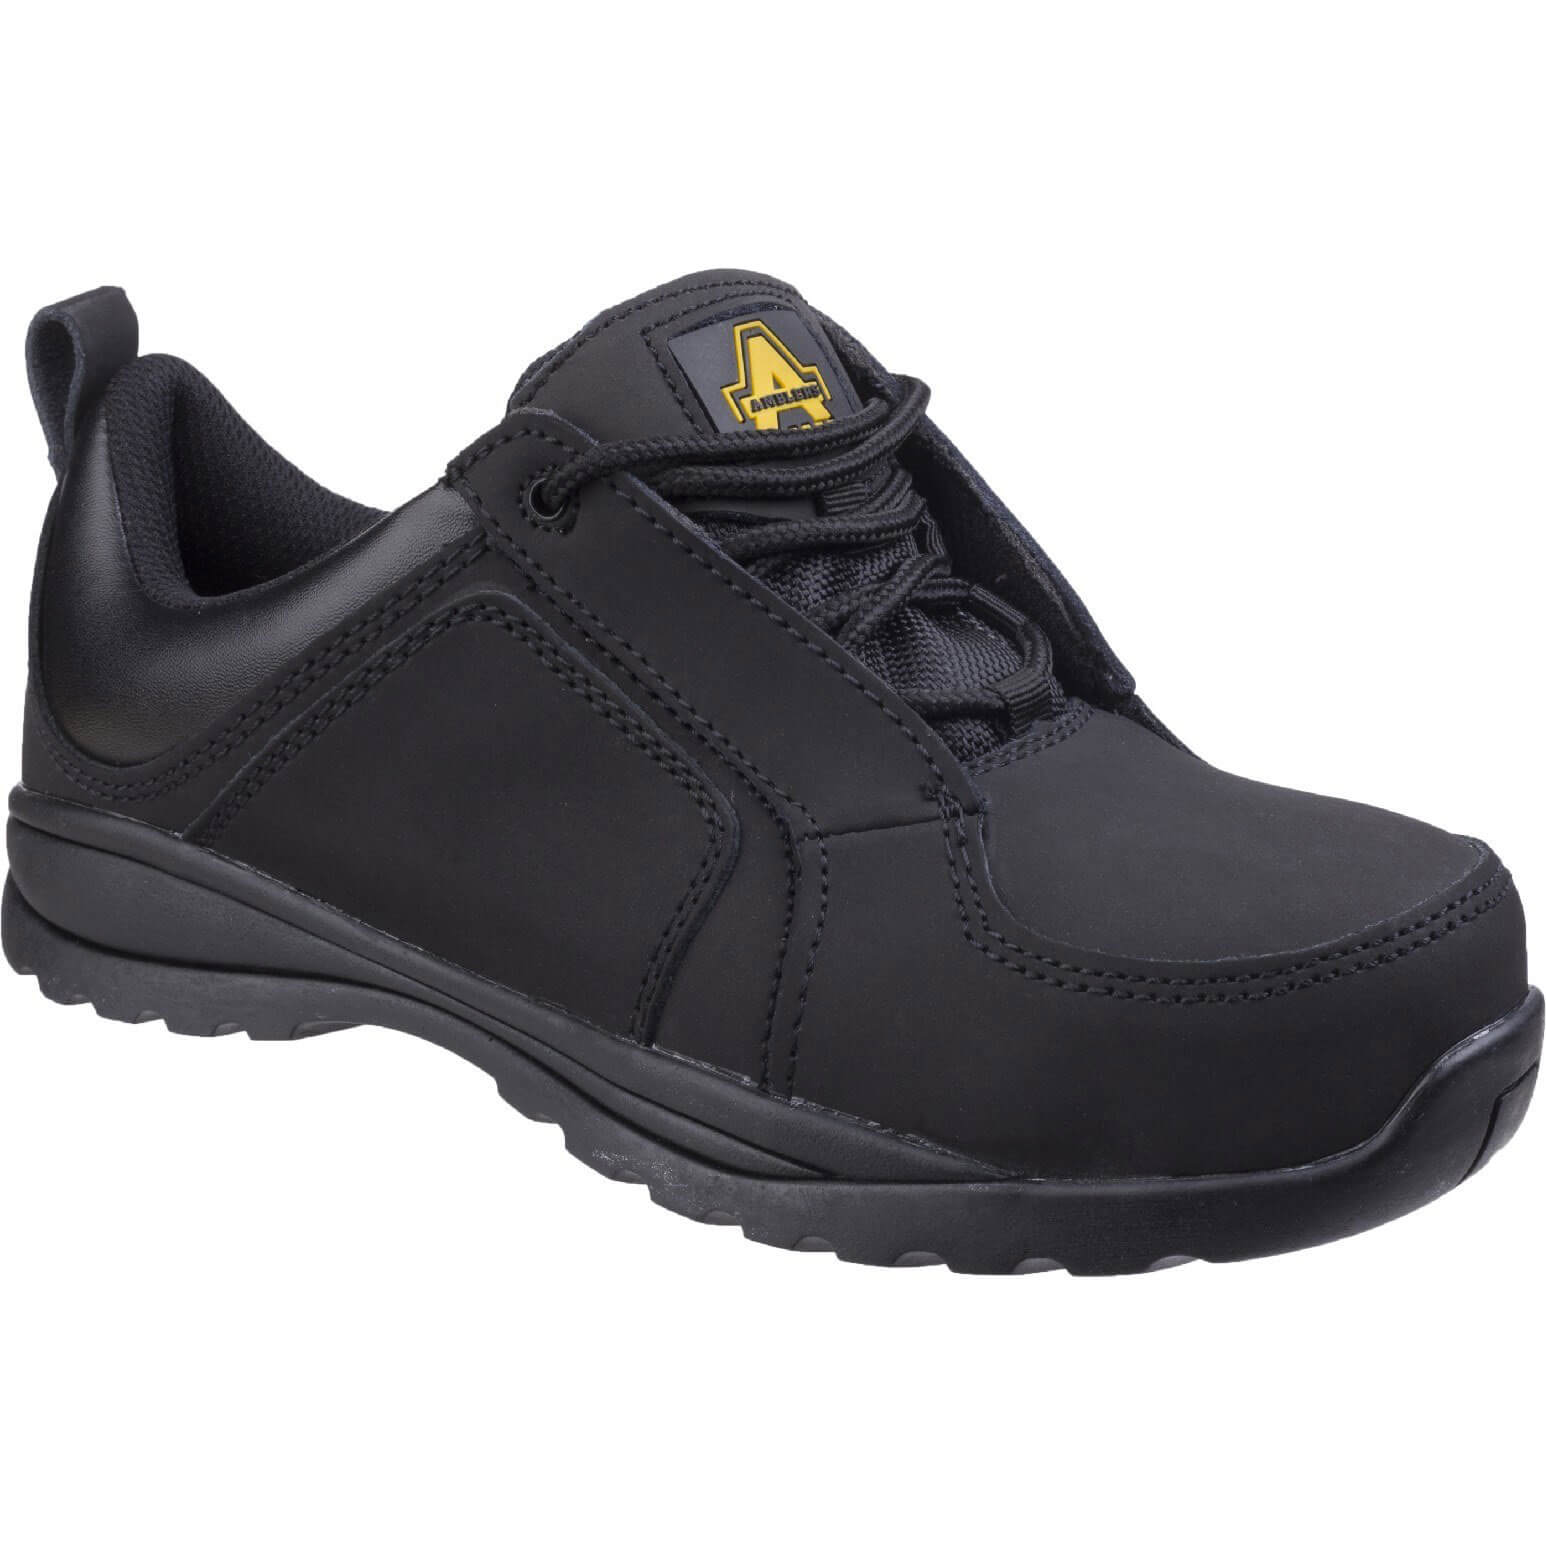 Image of Amblers Safety FS59C Metal Free Lace Up Safety Trainer Black Size 5